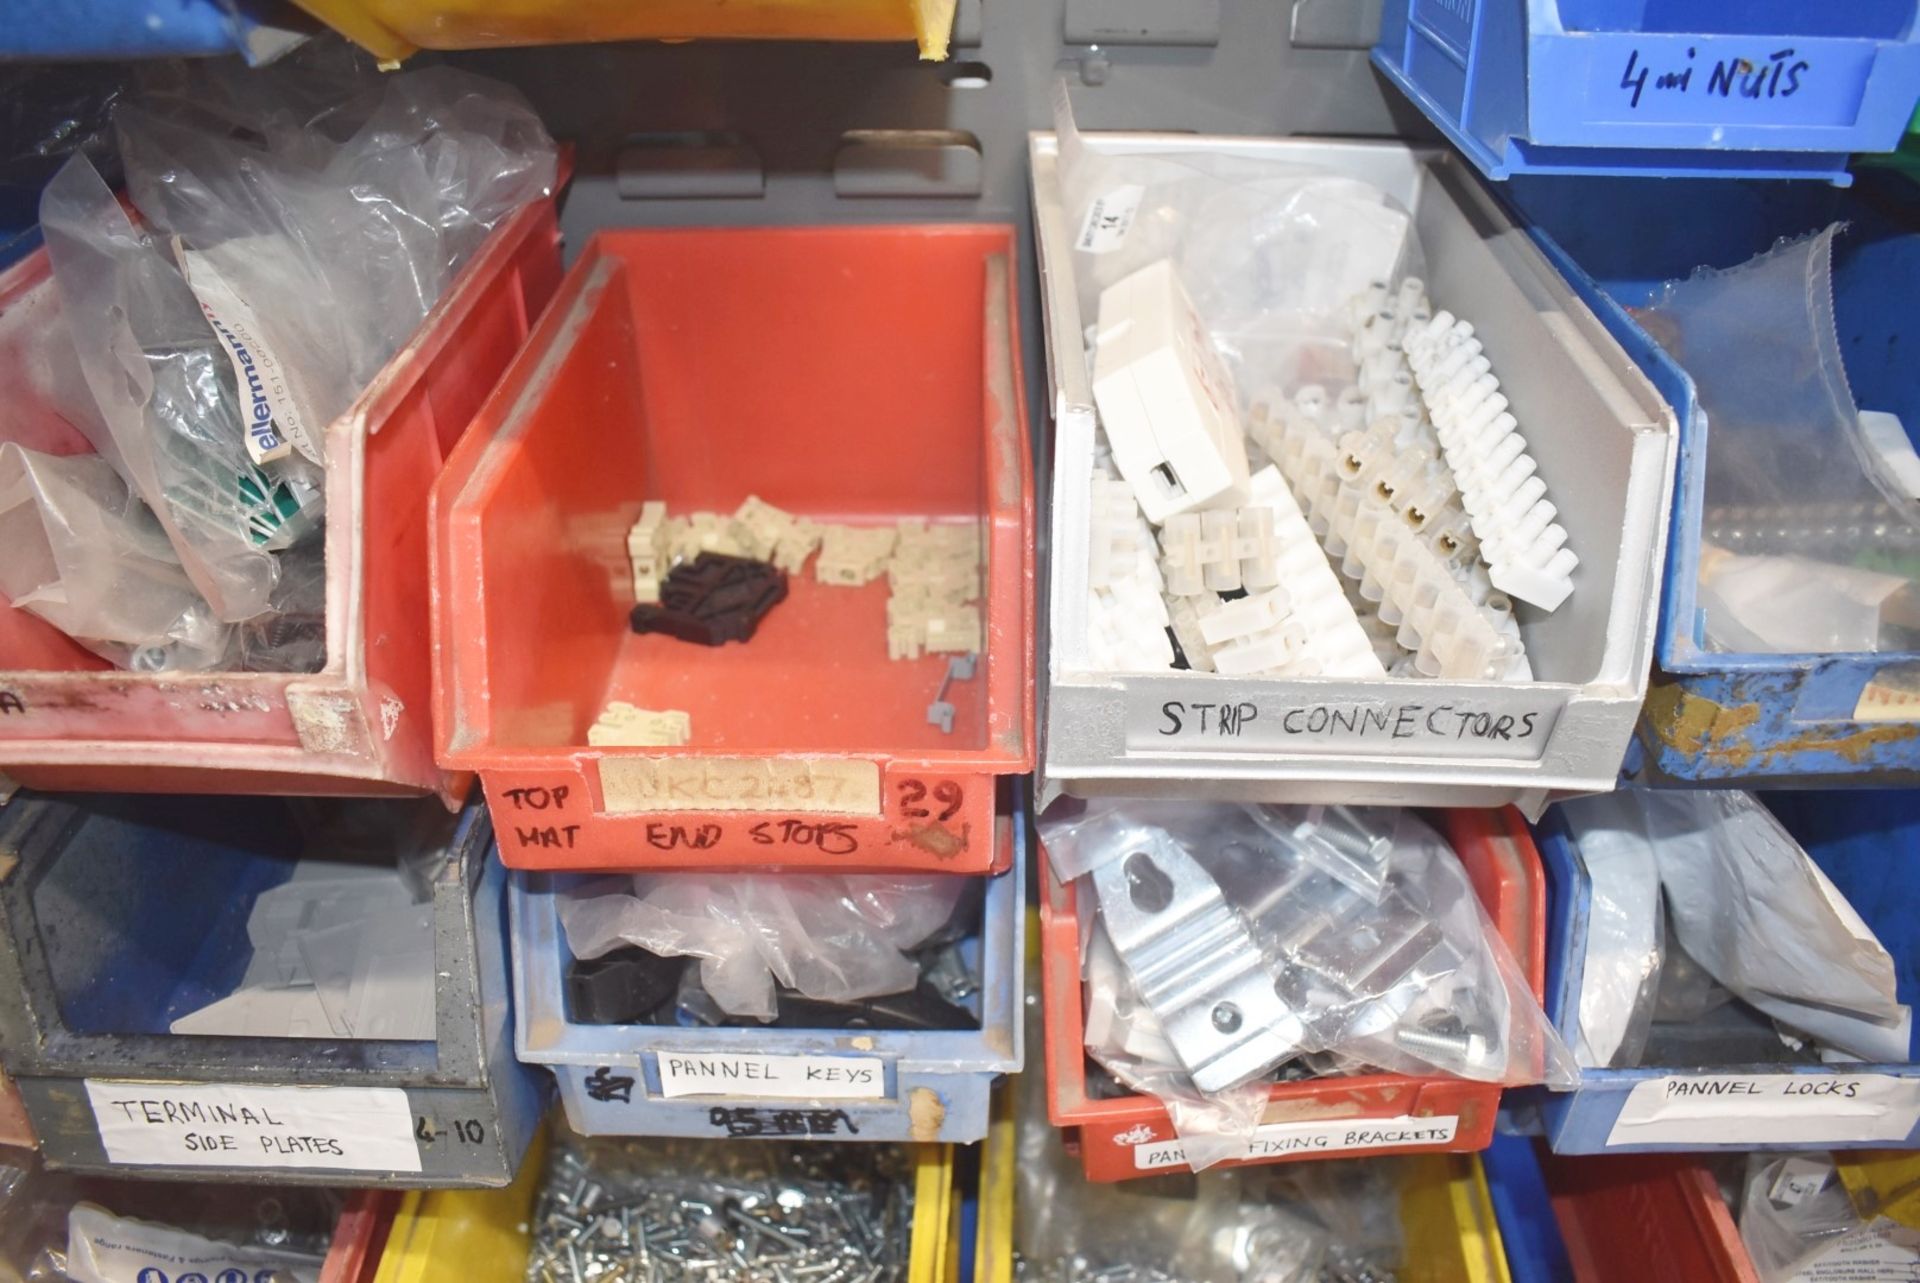 40 x Linbins With Contents - Screws, Nuts, Washes, Fixing Brackets, Strip Connects, Fuses and More - Image 11 of 24